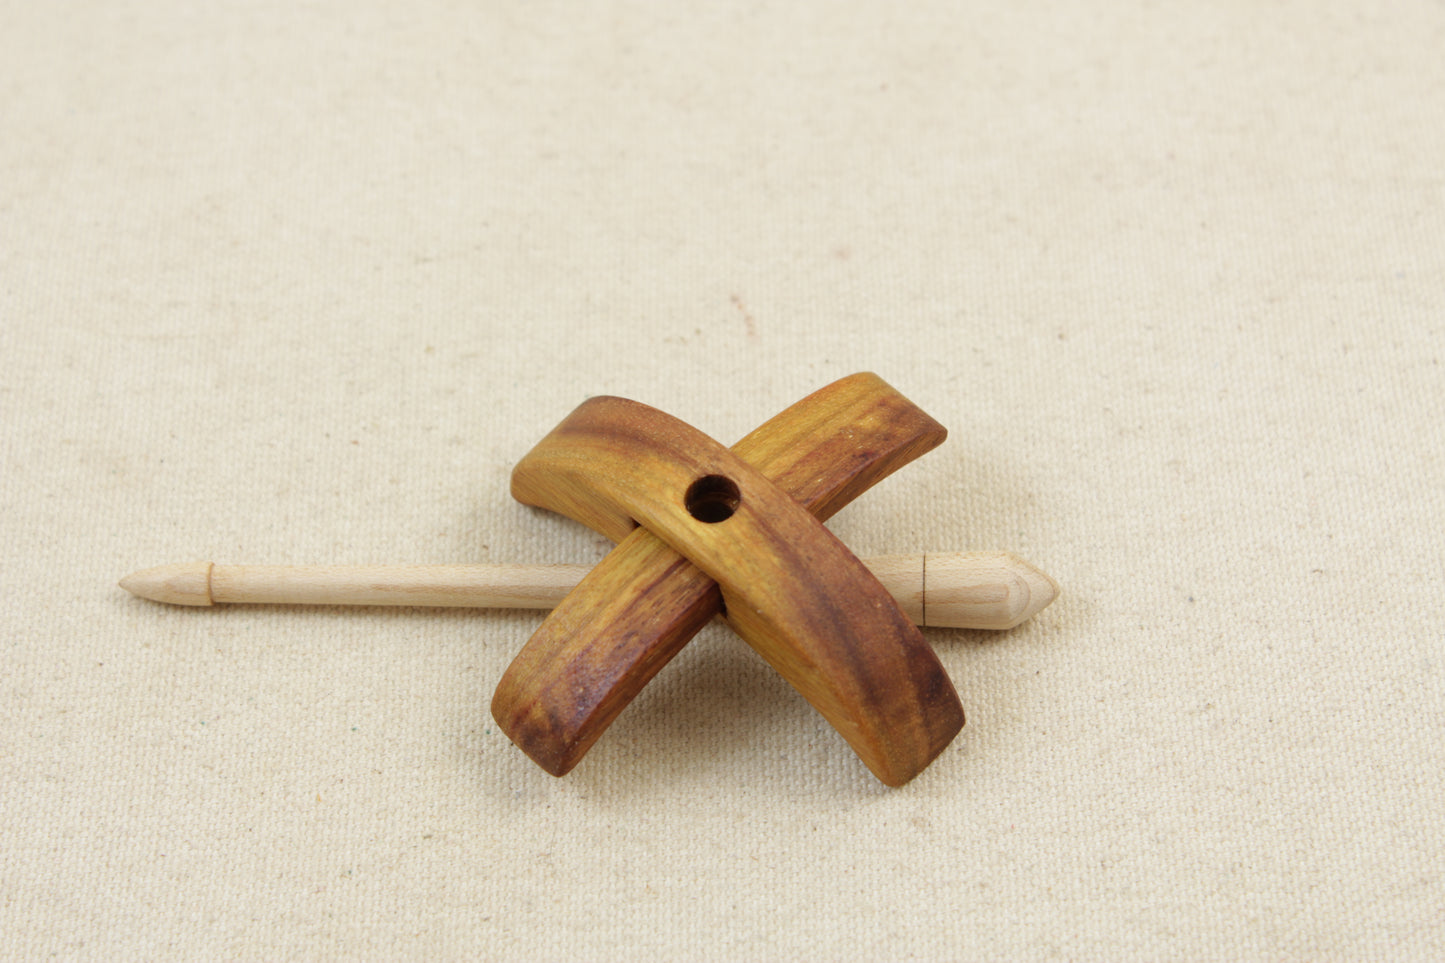 Canarywood Mini Turkish Drop Spindle 2.5 inch arms 4.25 tall